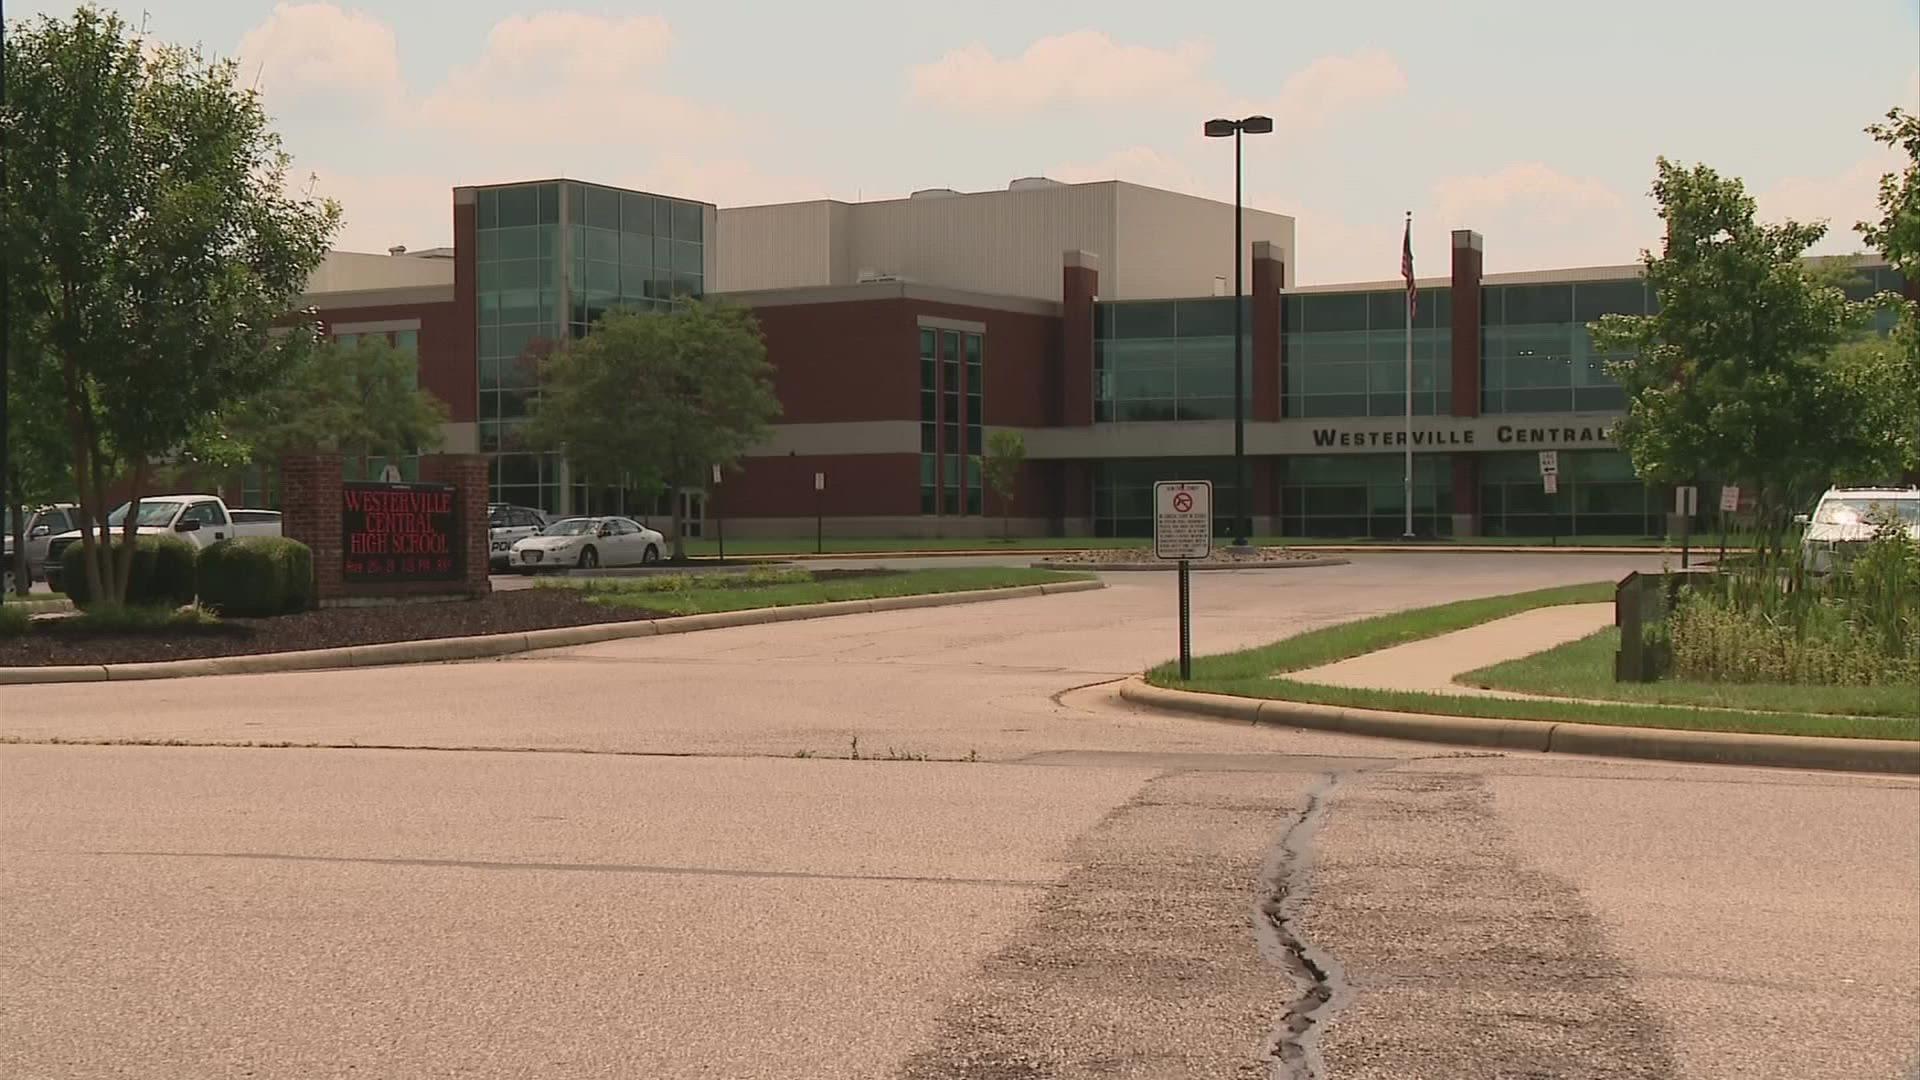 Police said a thorough investigation is underway with the school and several interviews have already been conducted.